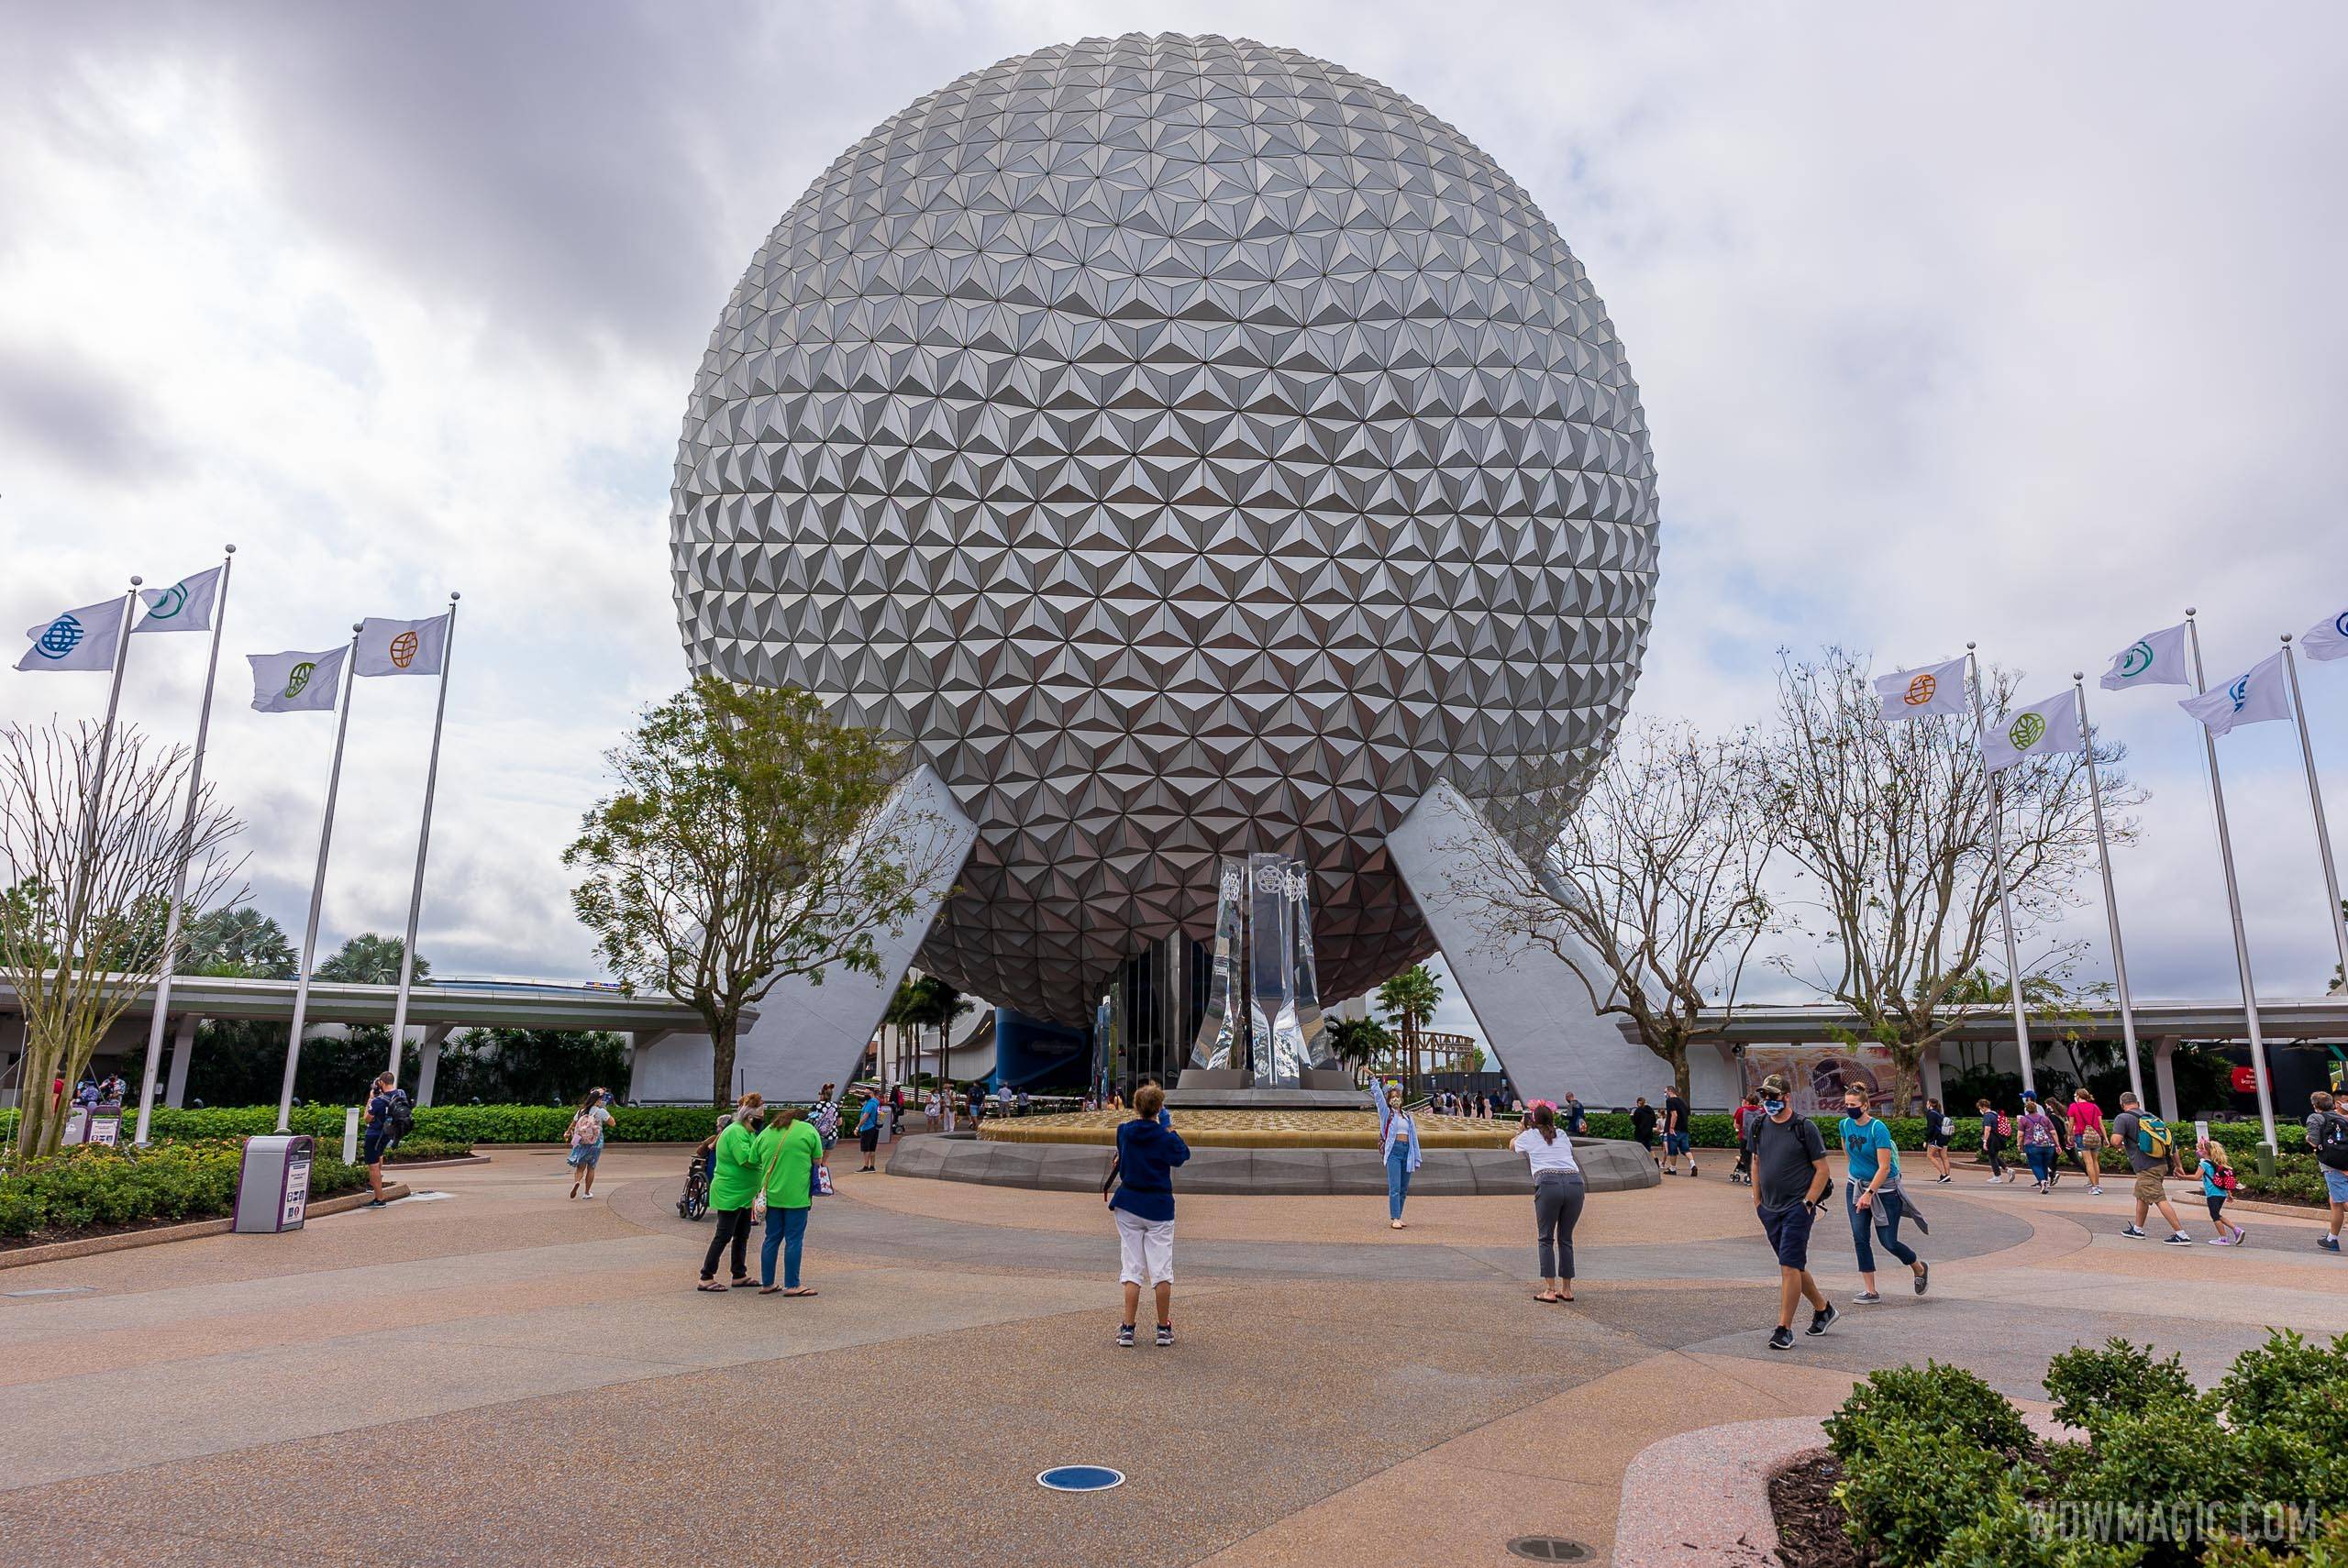 Guests posing for photo in-front of Spaceship Earth